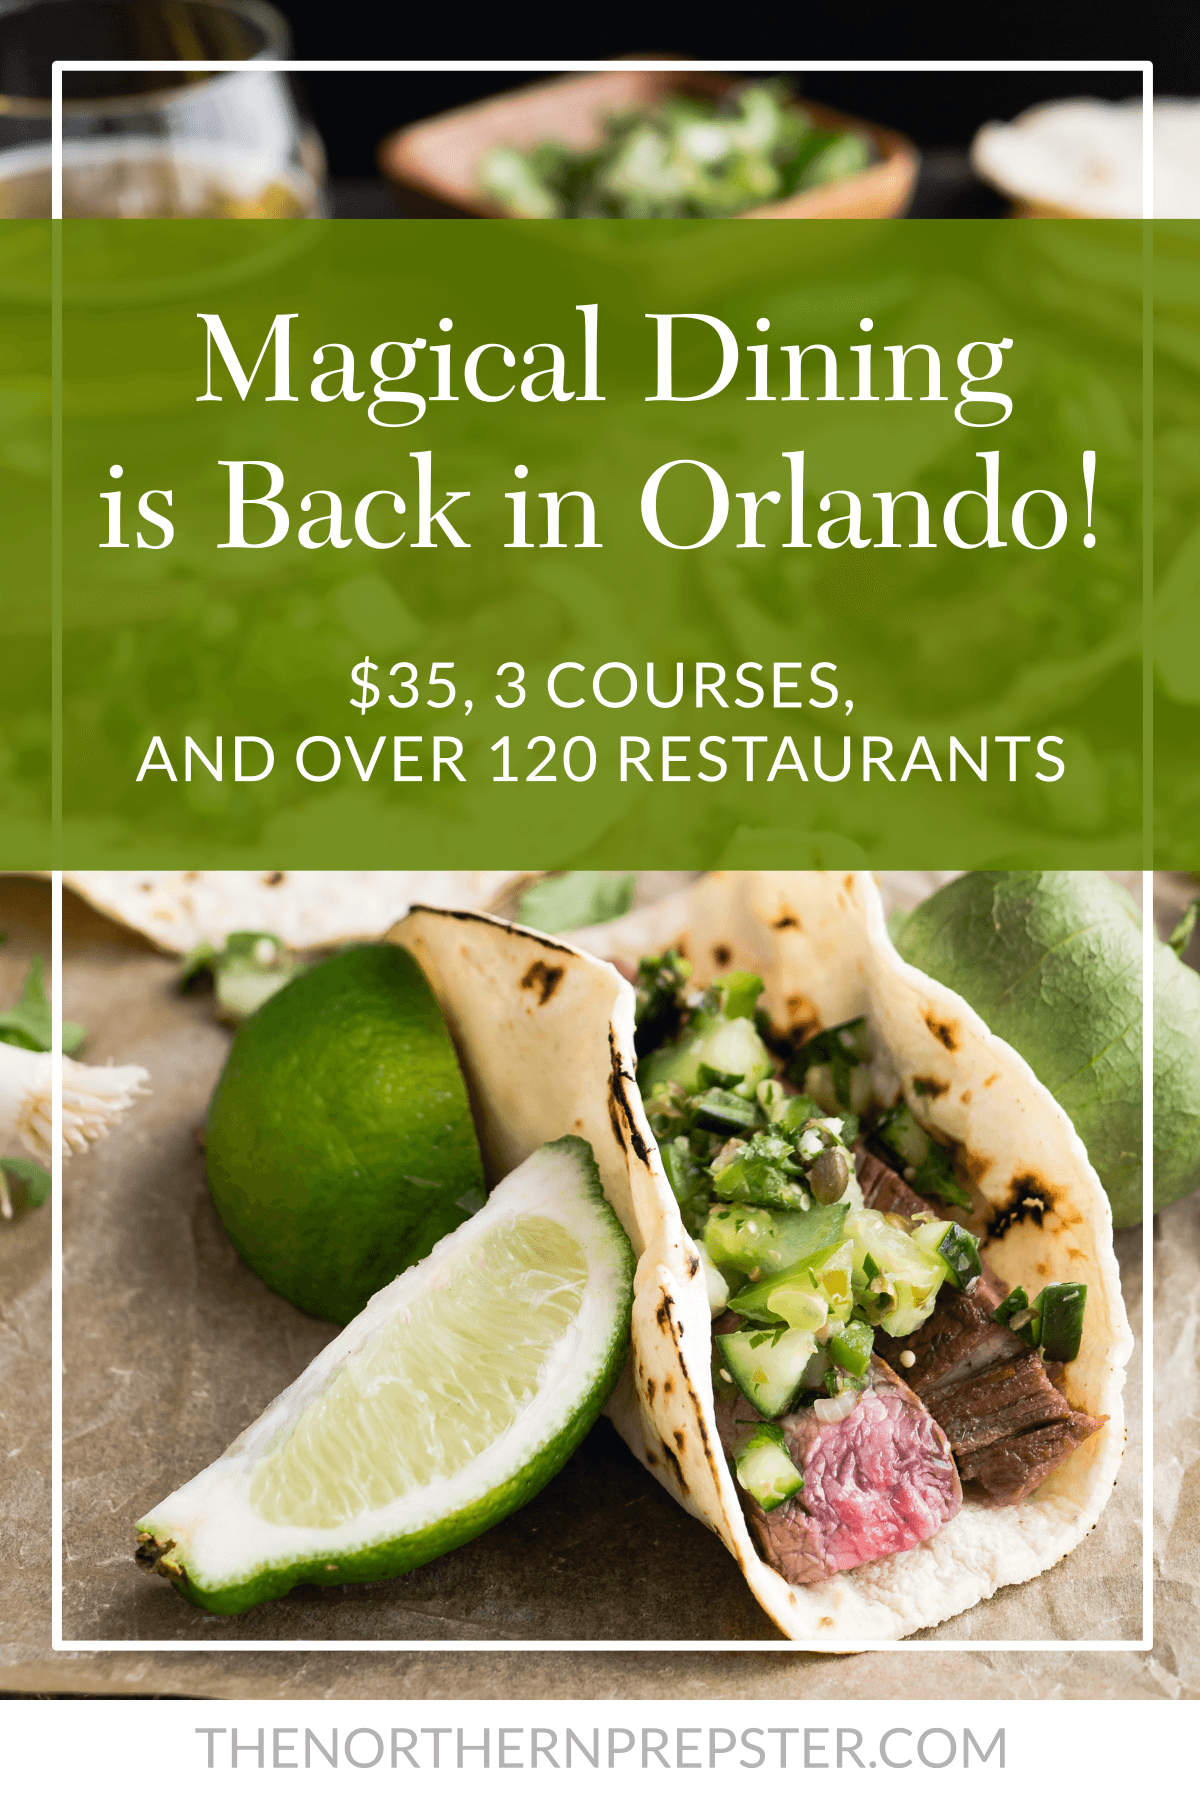 Magical Dining is Back in Orlando! 35, 3 Courses, and Over 120